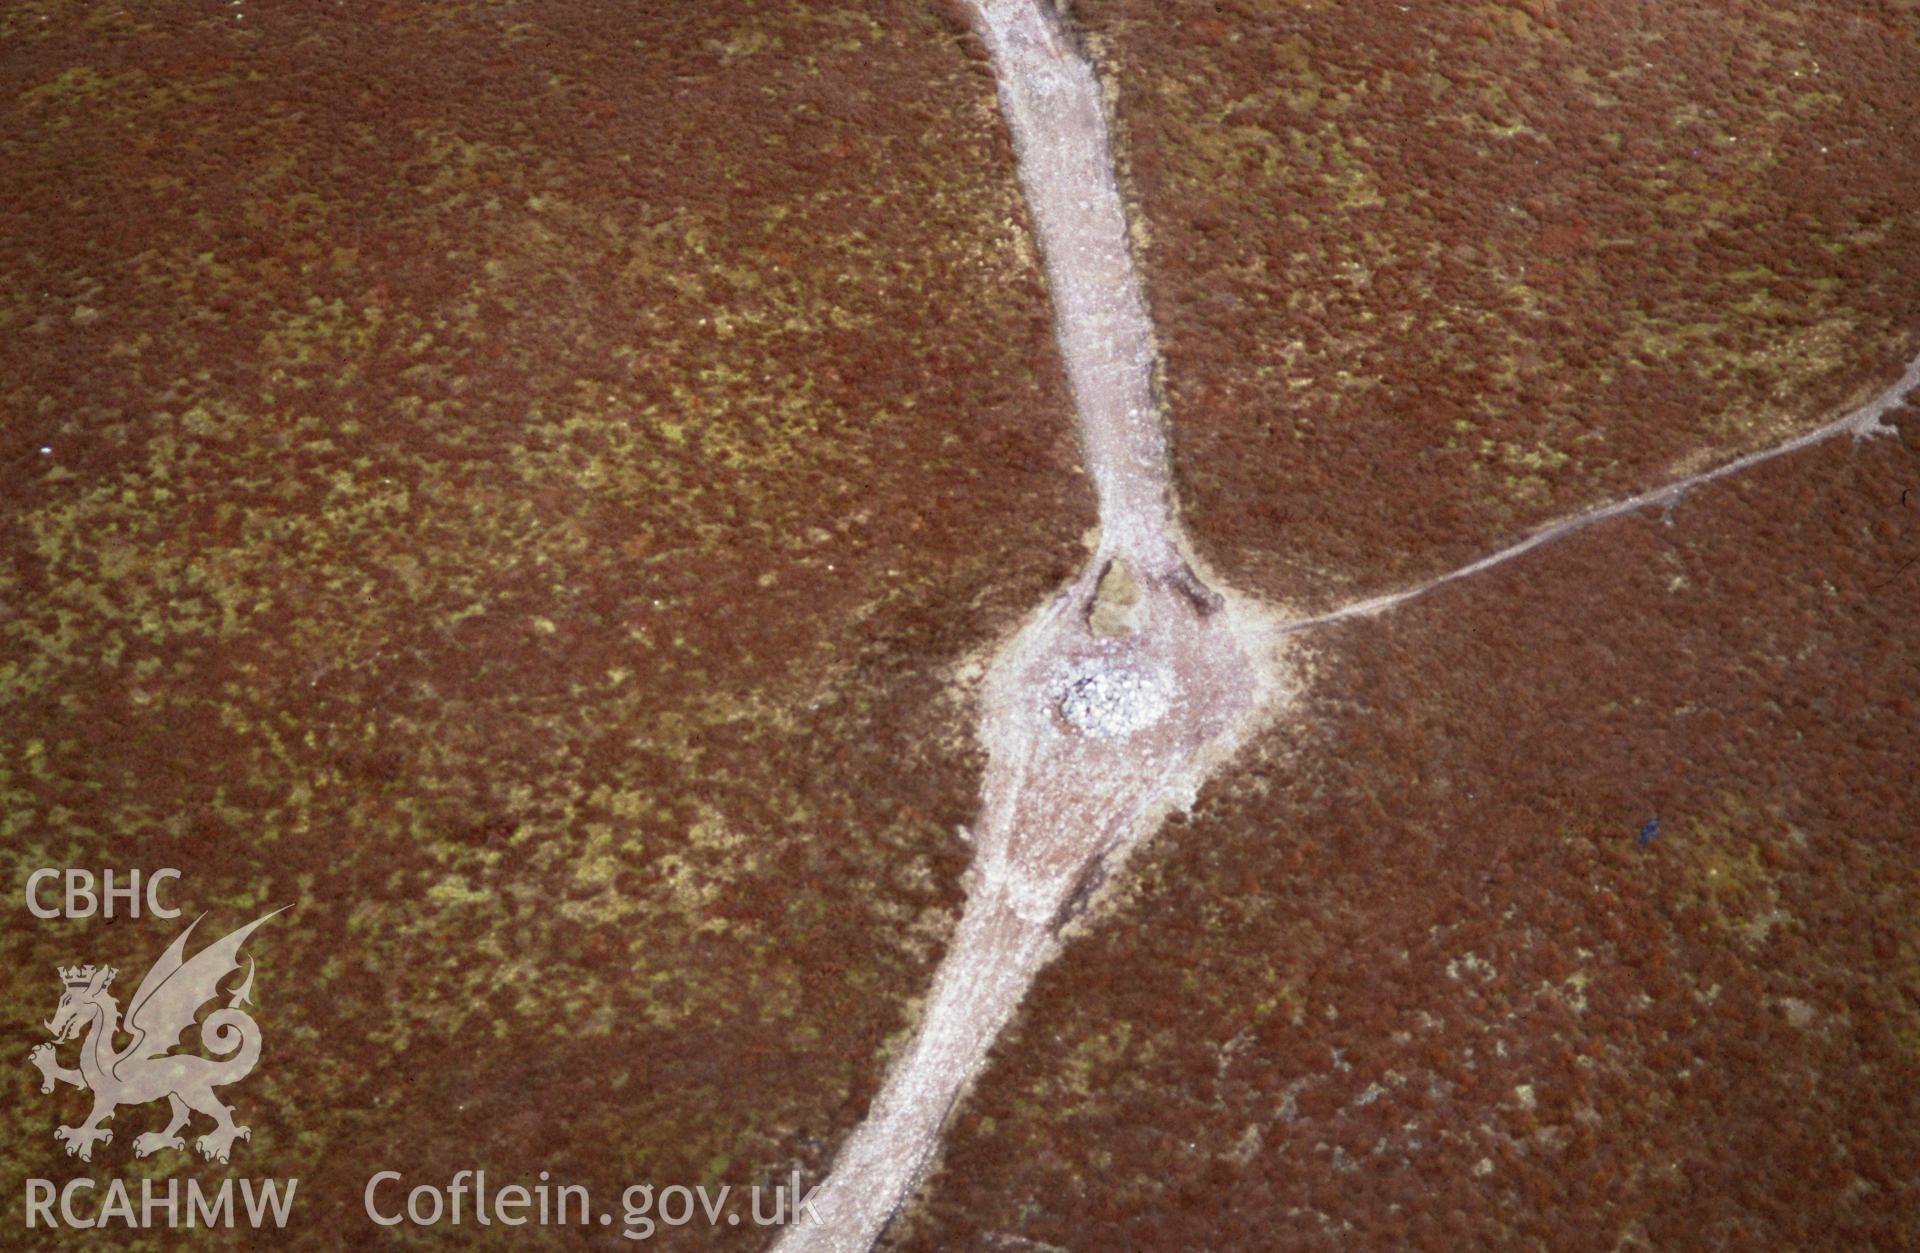 Slide of RCAHMW colour oblique aerial photograph of Moel y Gamelin Cairn, Llantyssilio, taken by Toby Driver, 2001.